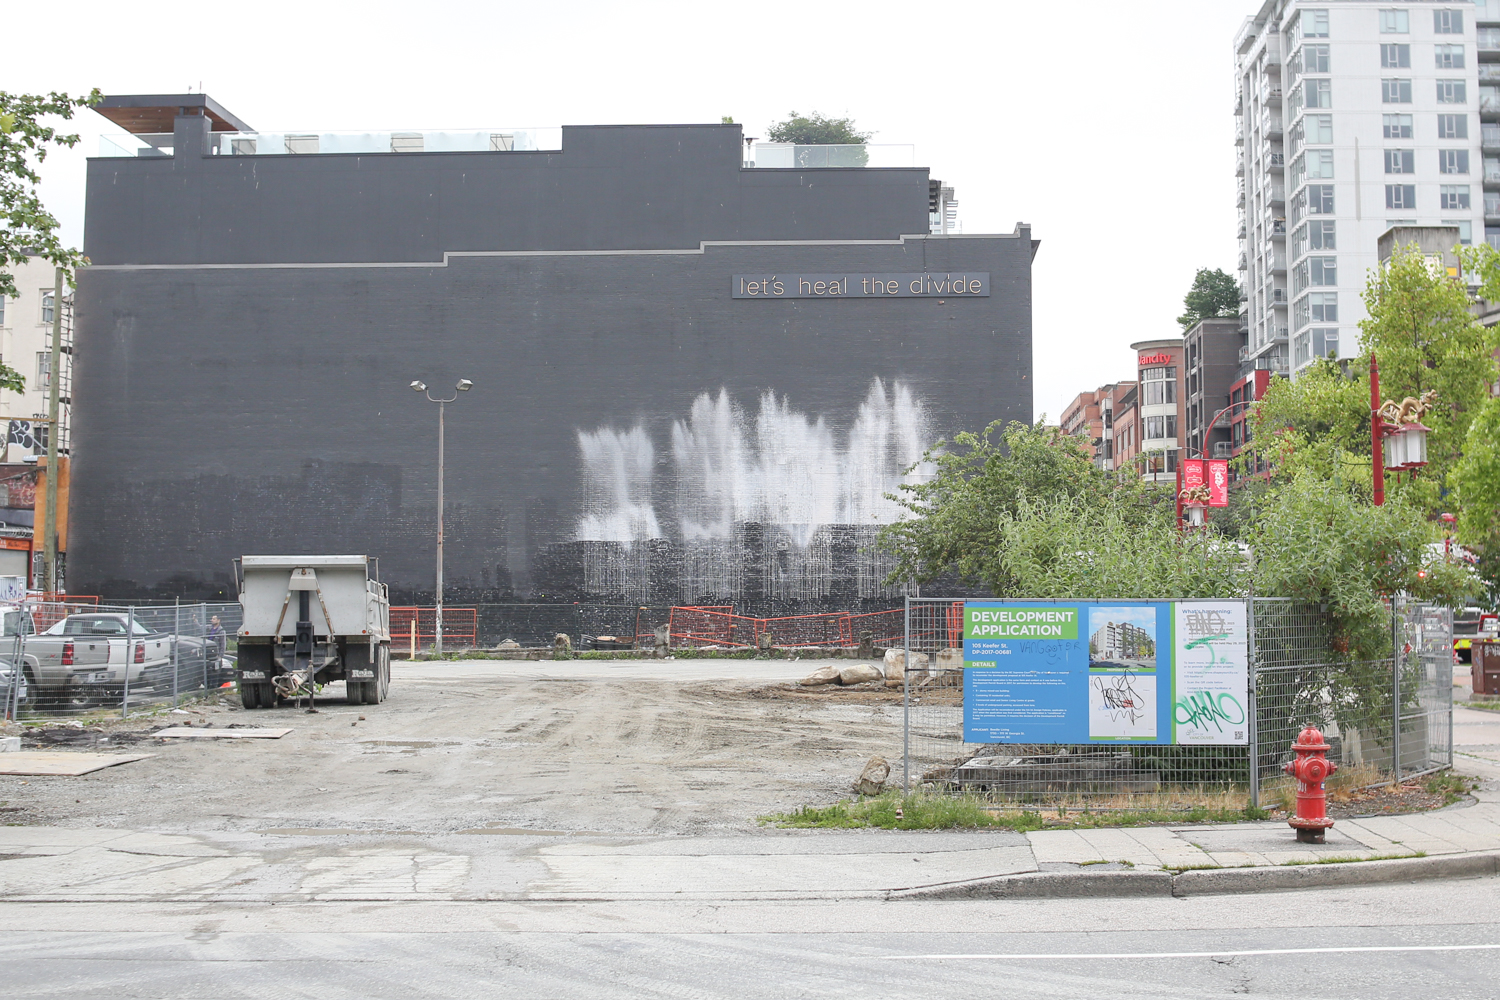 An empty piece of land with some dirt trucks. It is fenced off. On the fence is a bright blue design for a development application with a picture of a condo building on it. On the side of an adjacent building in the back are words in neon: “Let’s heal the divide.”